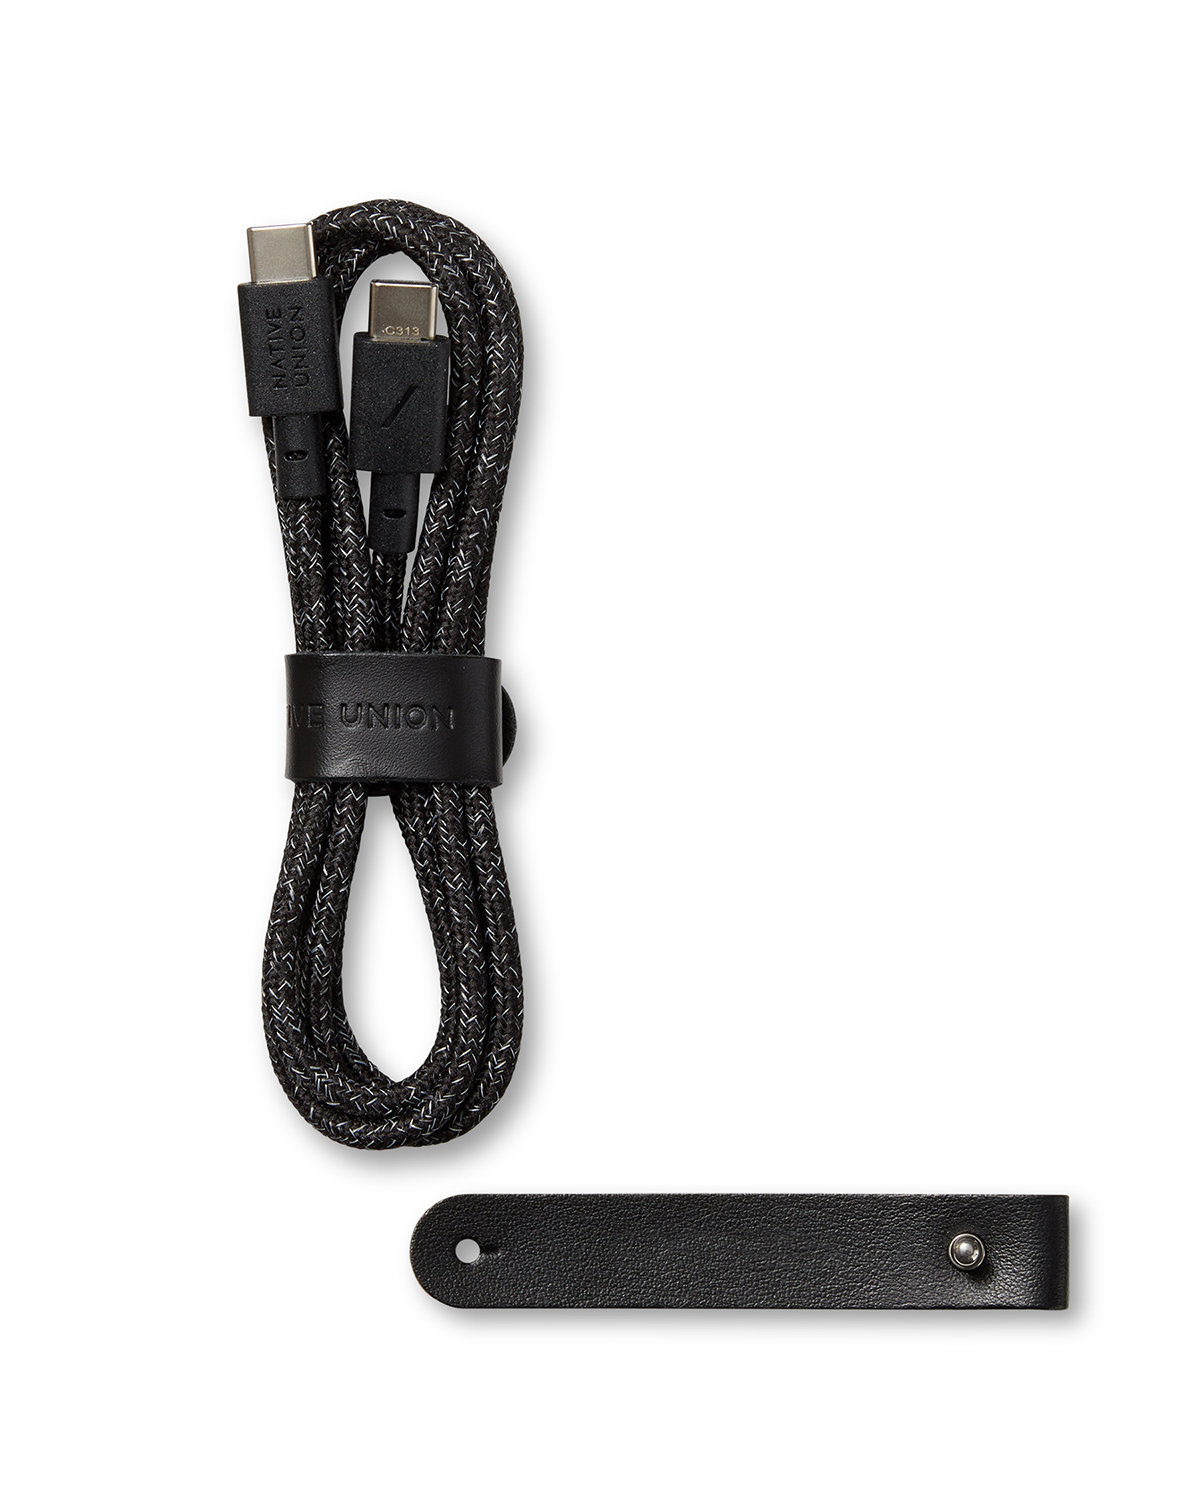 Belt Cable Usb Charger-Native Union